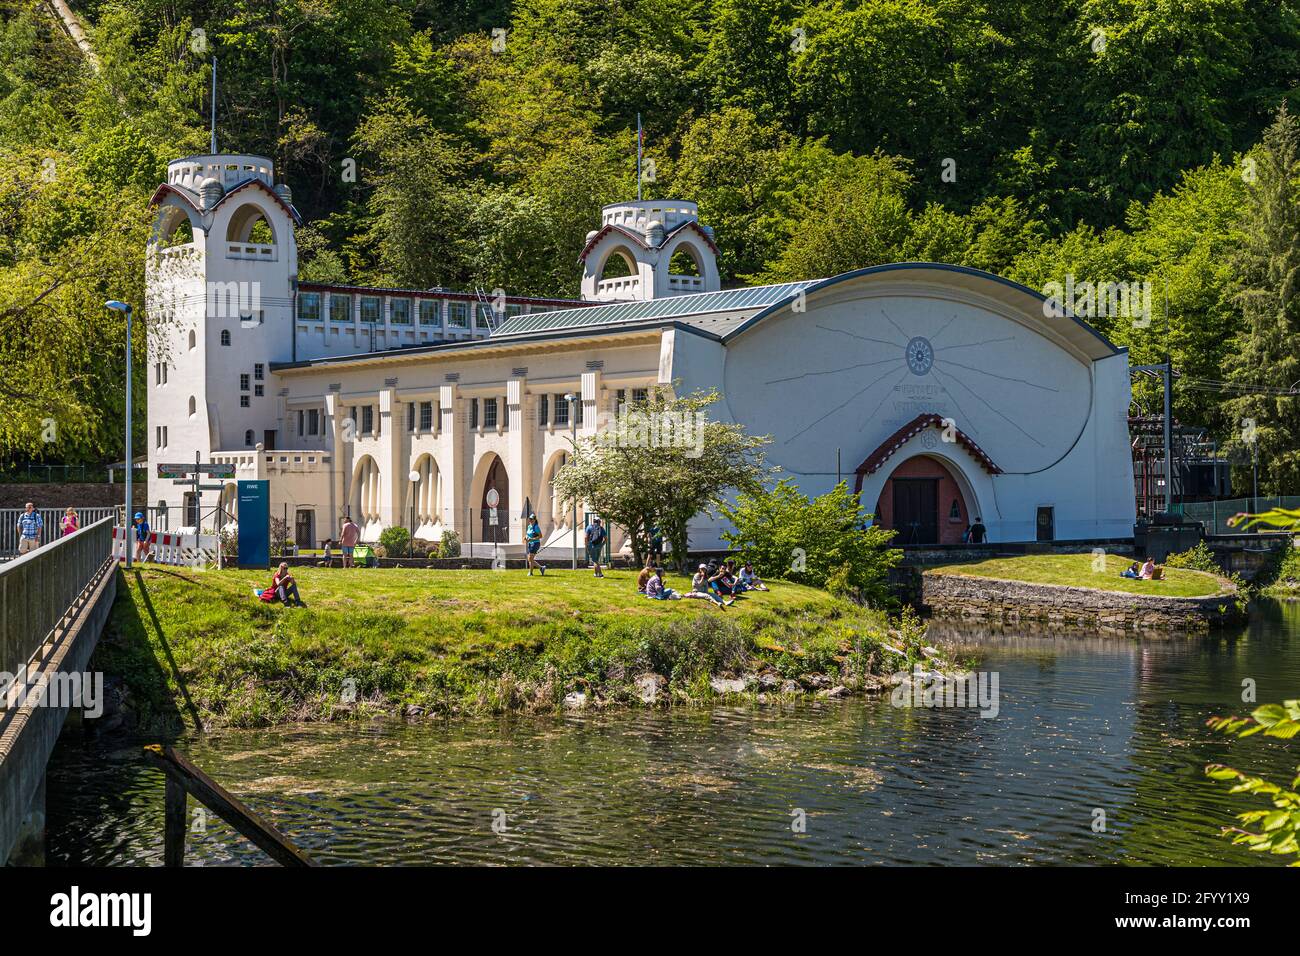 Heimbach art nouveau hydroelectric power station. Heimbach, Germany Stock Photo